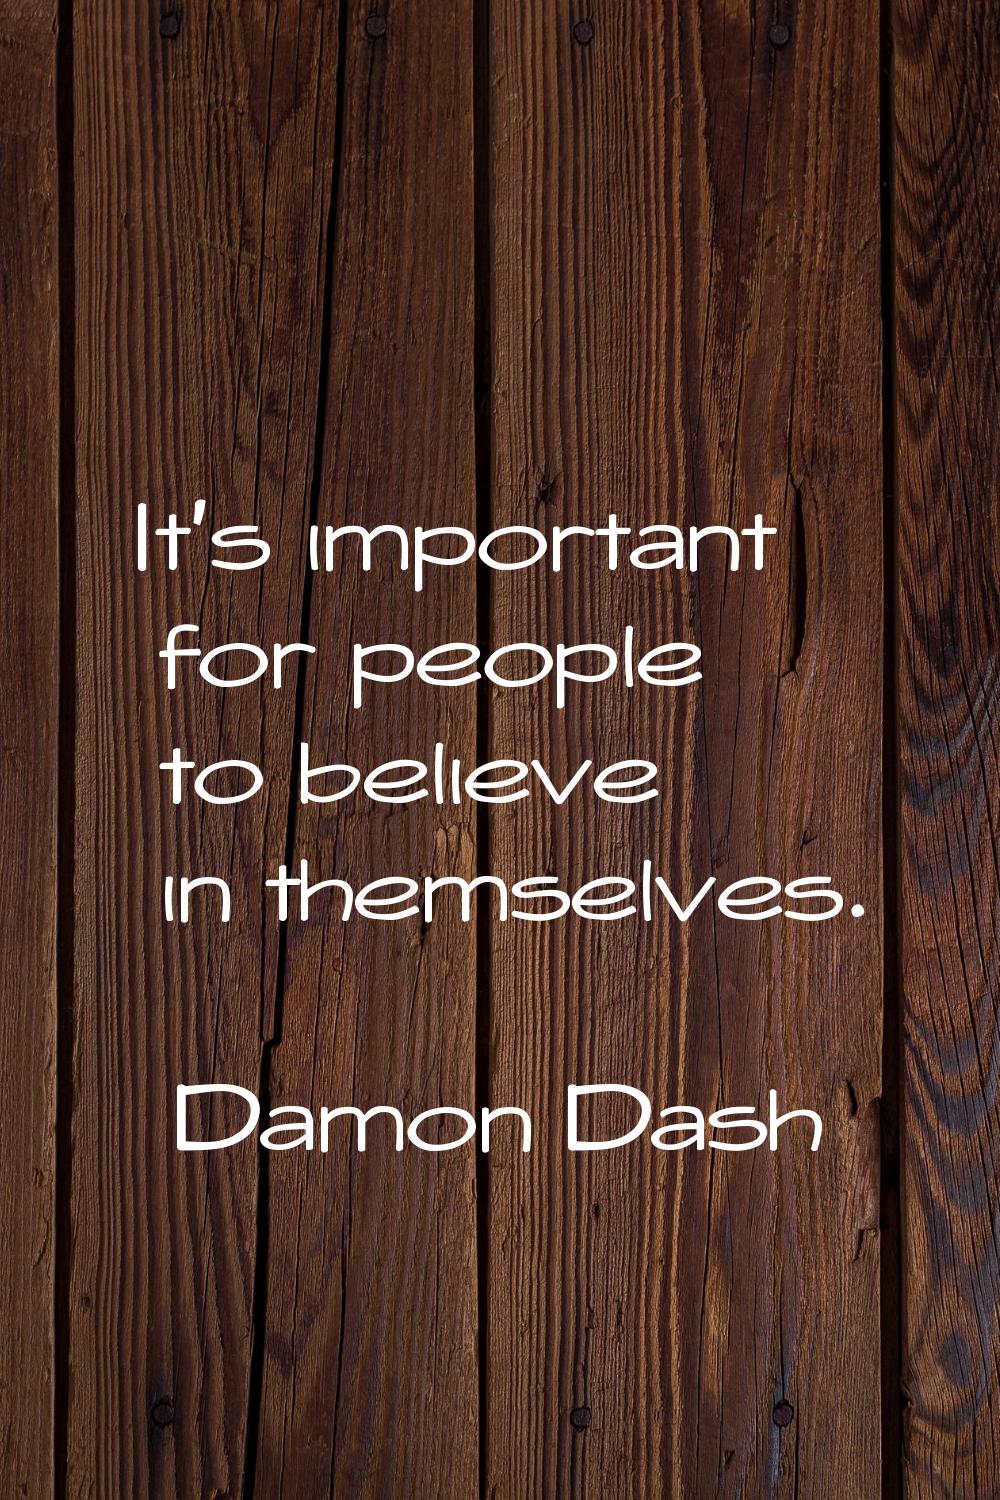 It's important for people to believe in themselves.